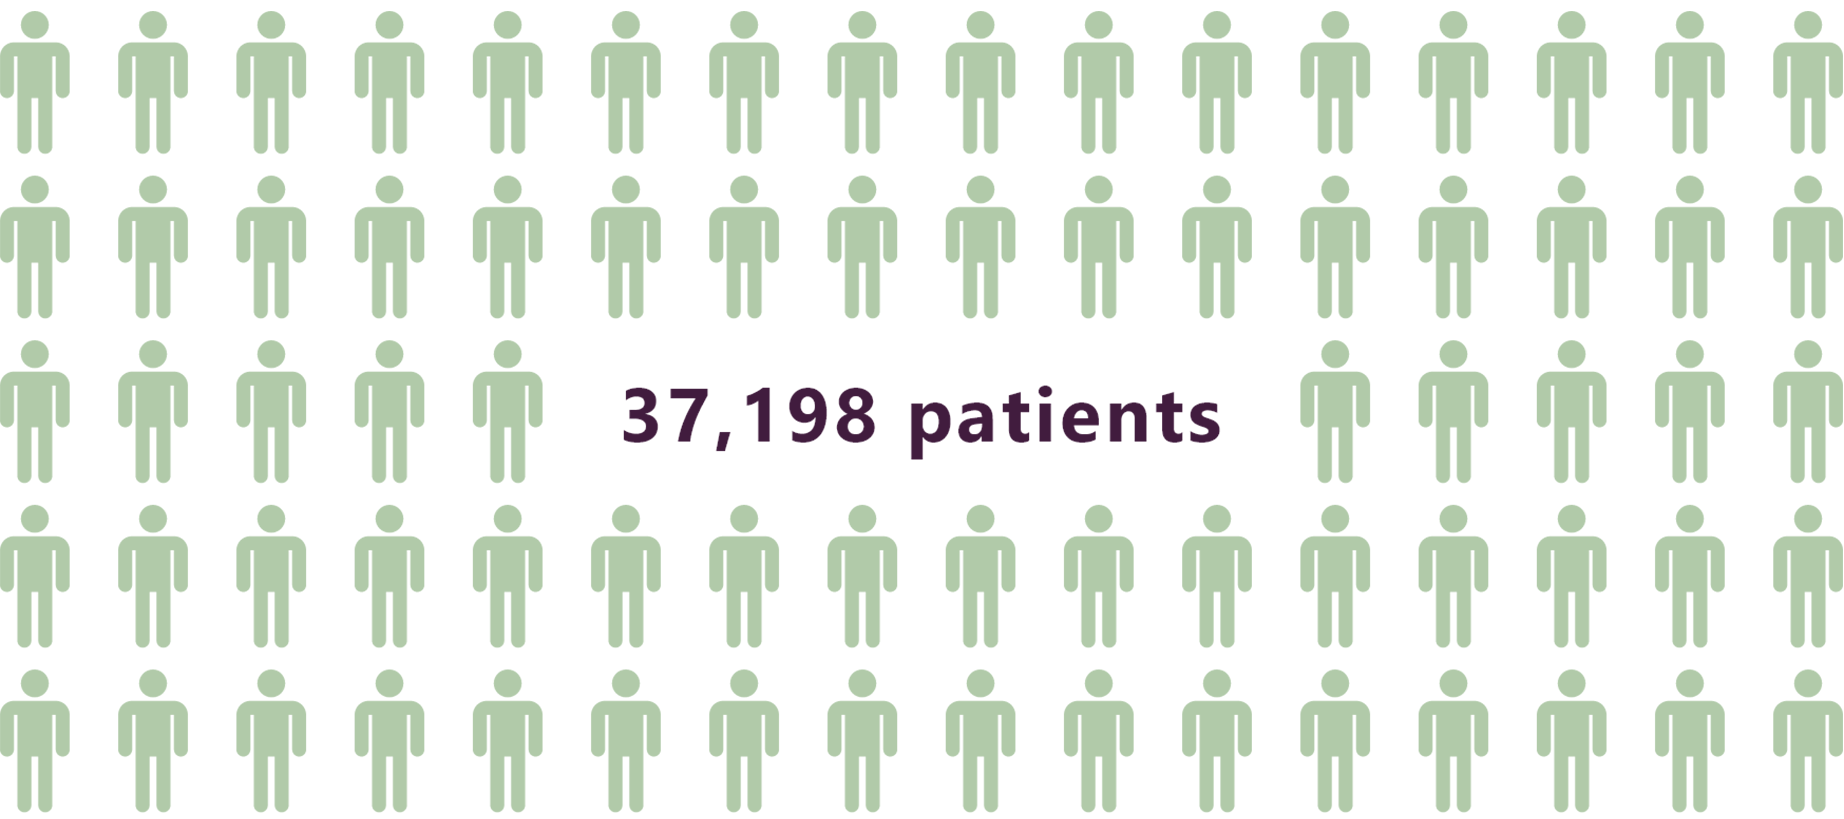 featured_ultimaster_features_37198patients_1844x819.png